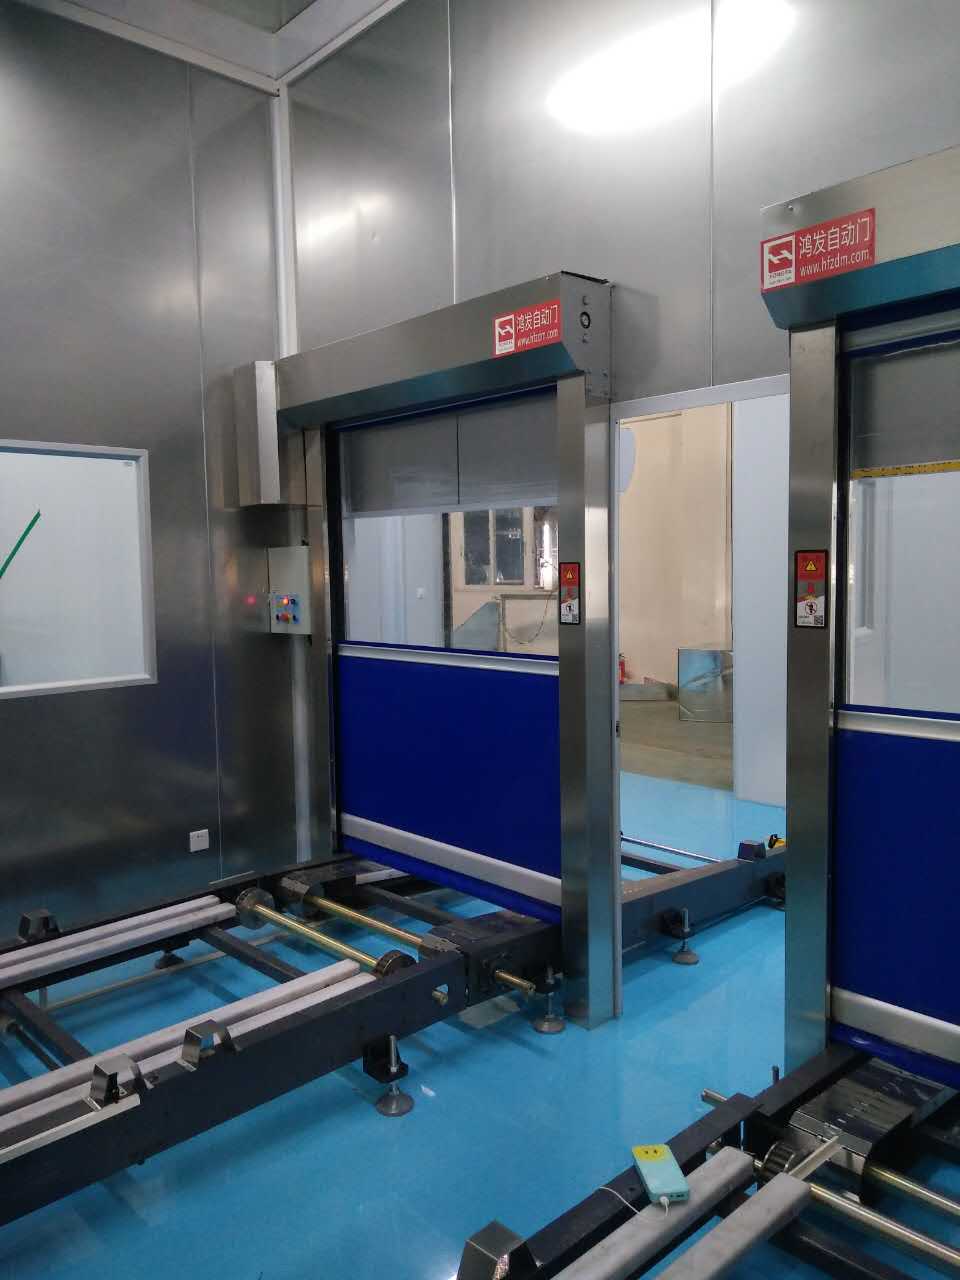 High Quality Automatic Rapid Industrial Rolling Shutter Door